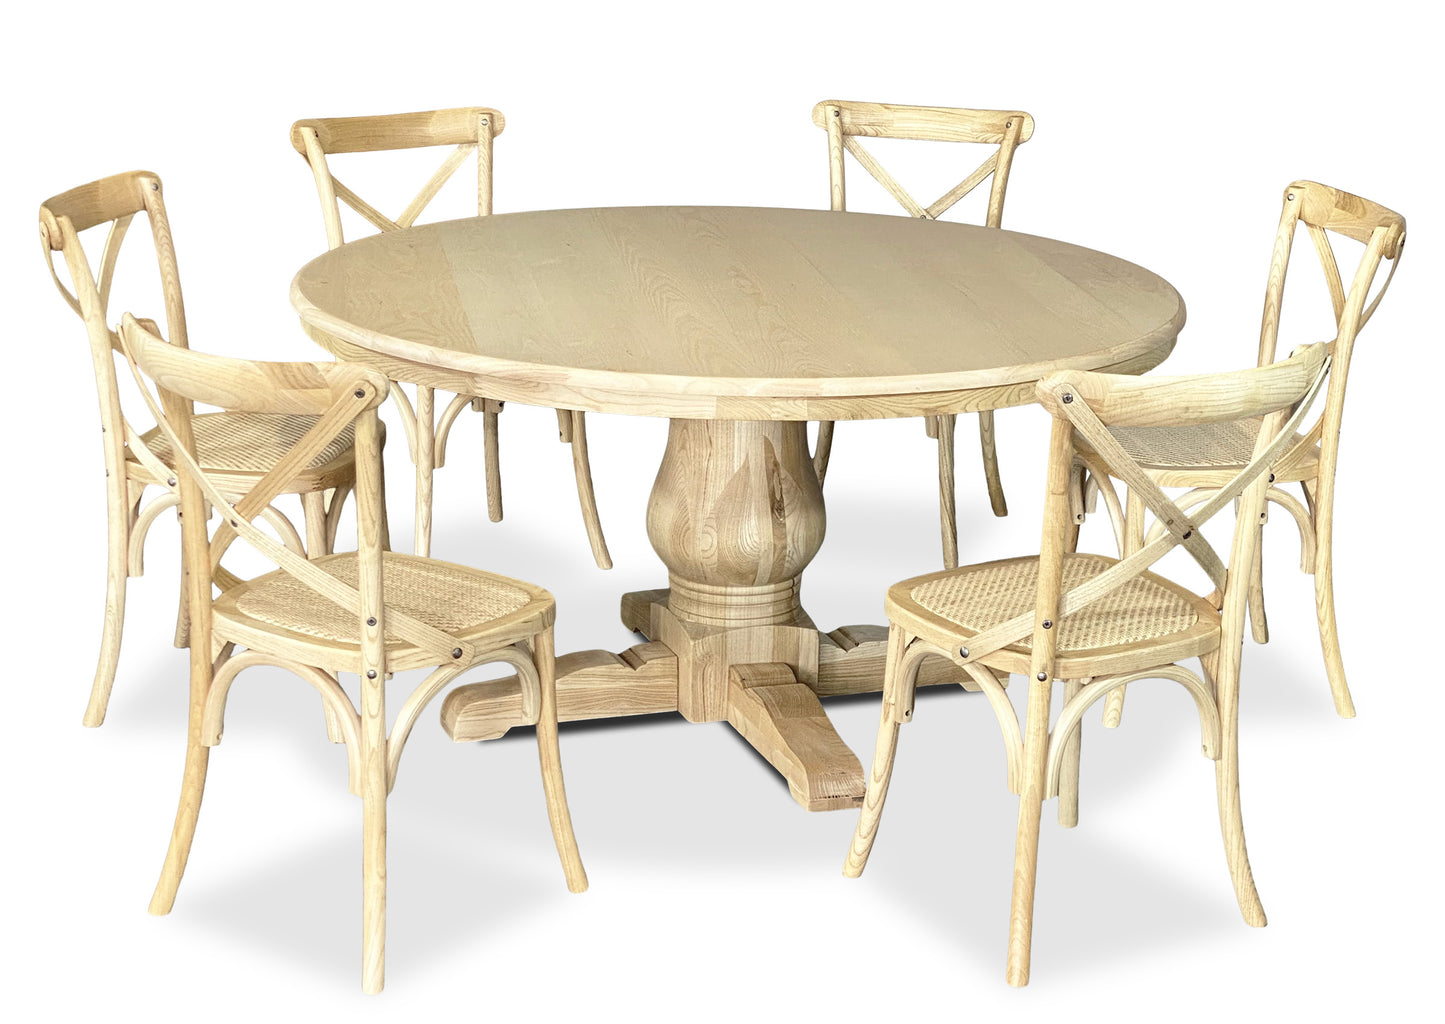 Parisienne Dining Table - Blonde (1500mm)